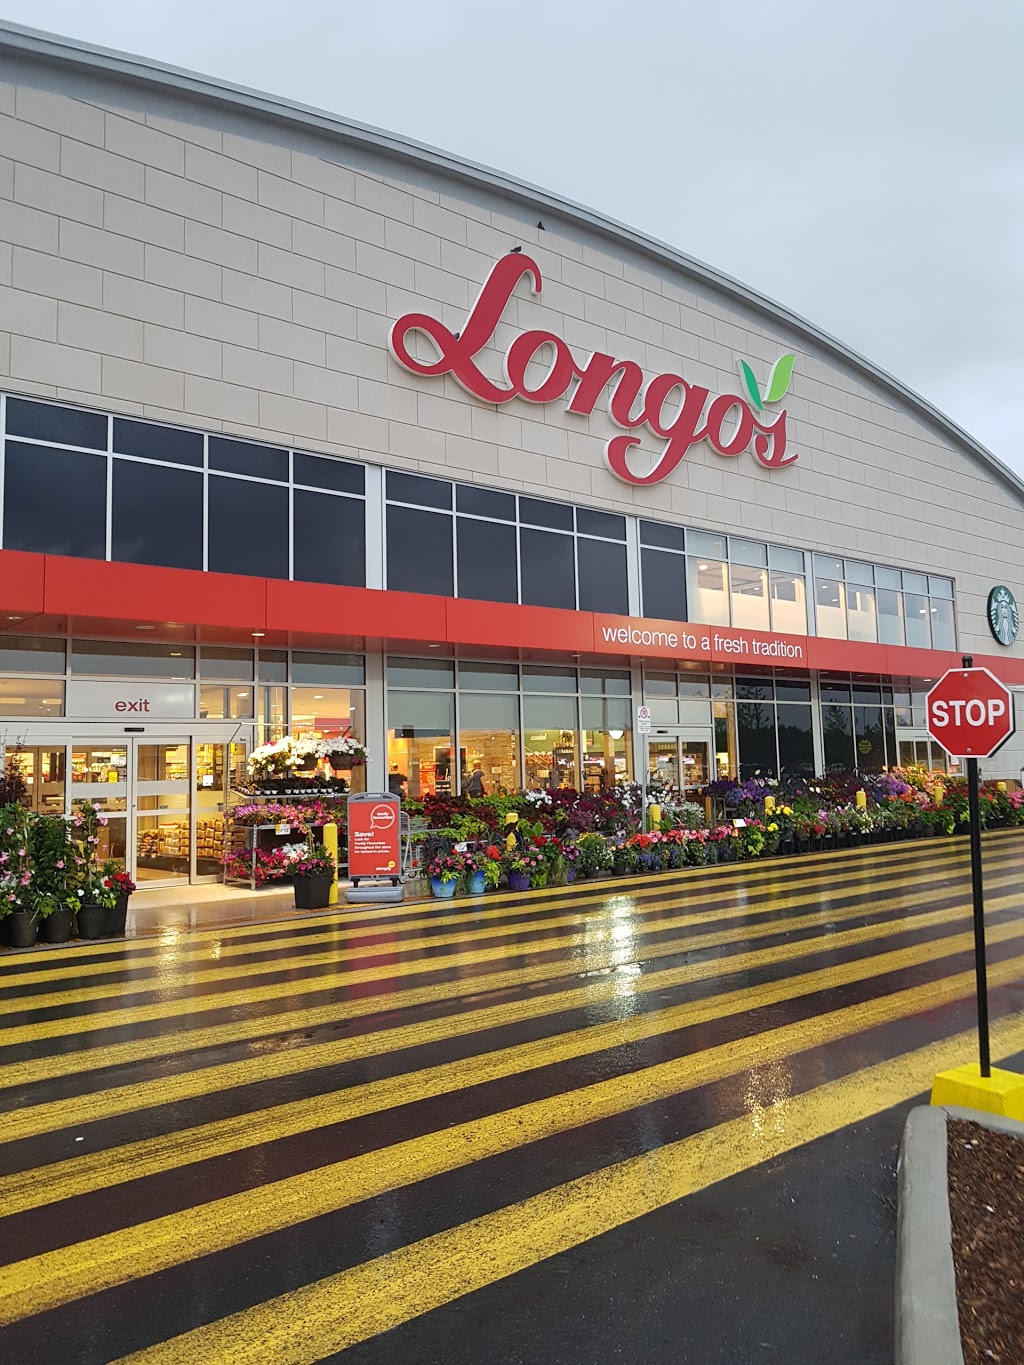 Longos Ancaster | bakery | 1191 Wilson St W #1, Ancaster, ON L9G 0E8, Canada | 9056481644 OR +1 905-648-1644